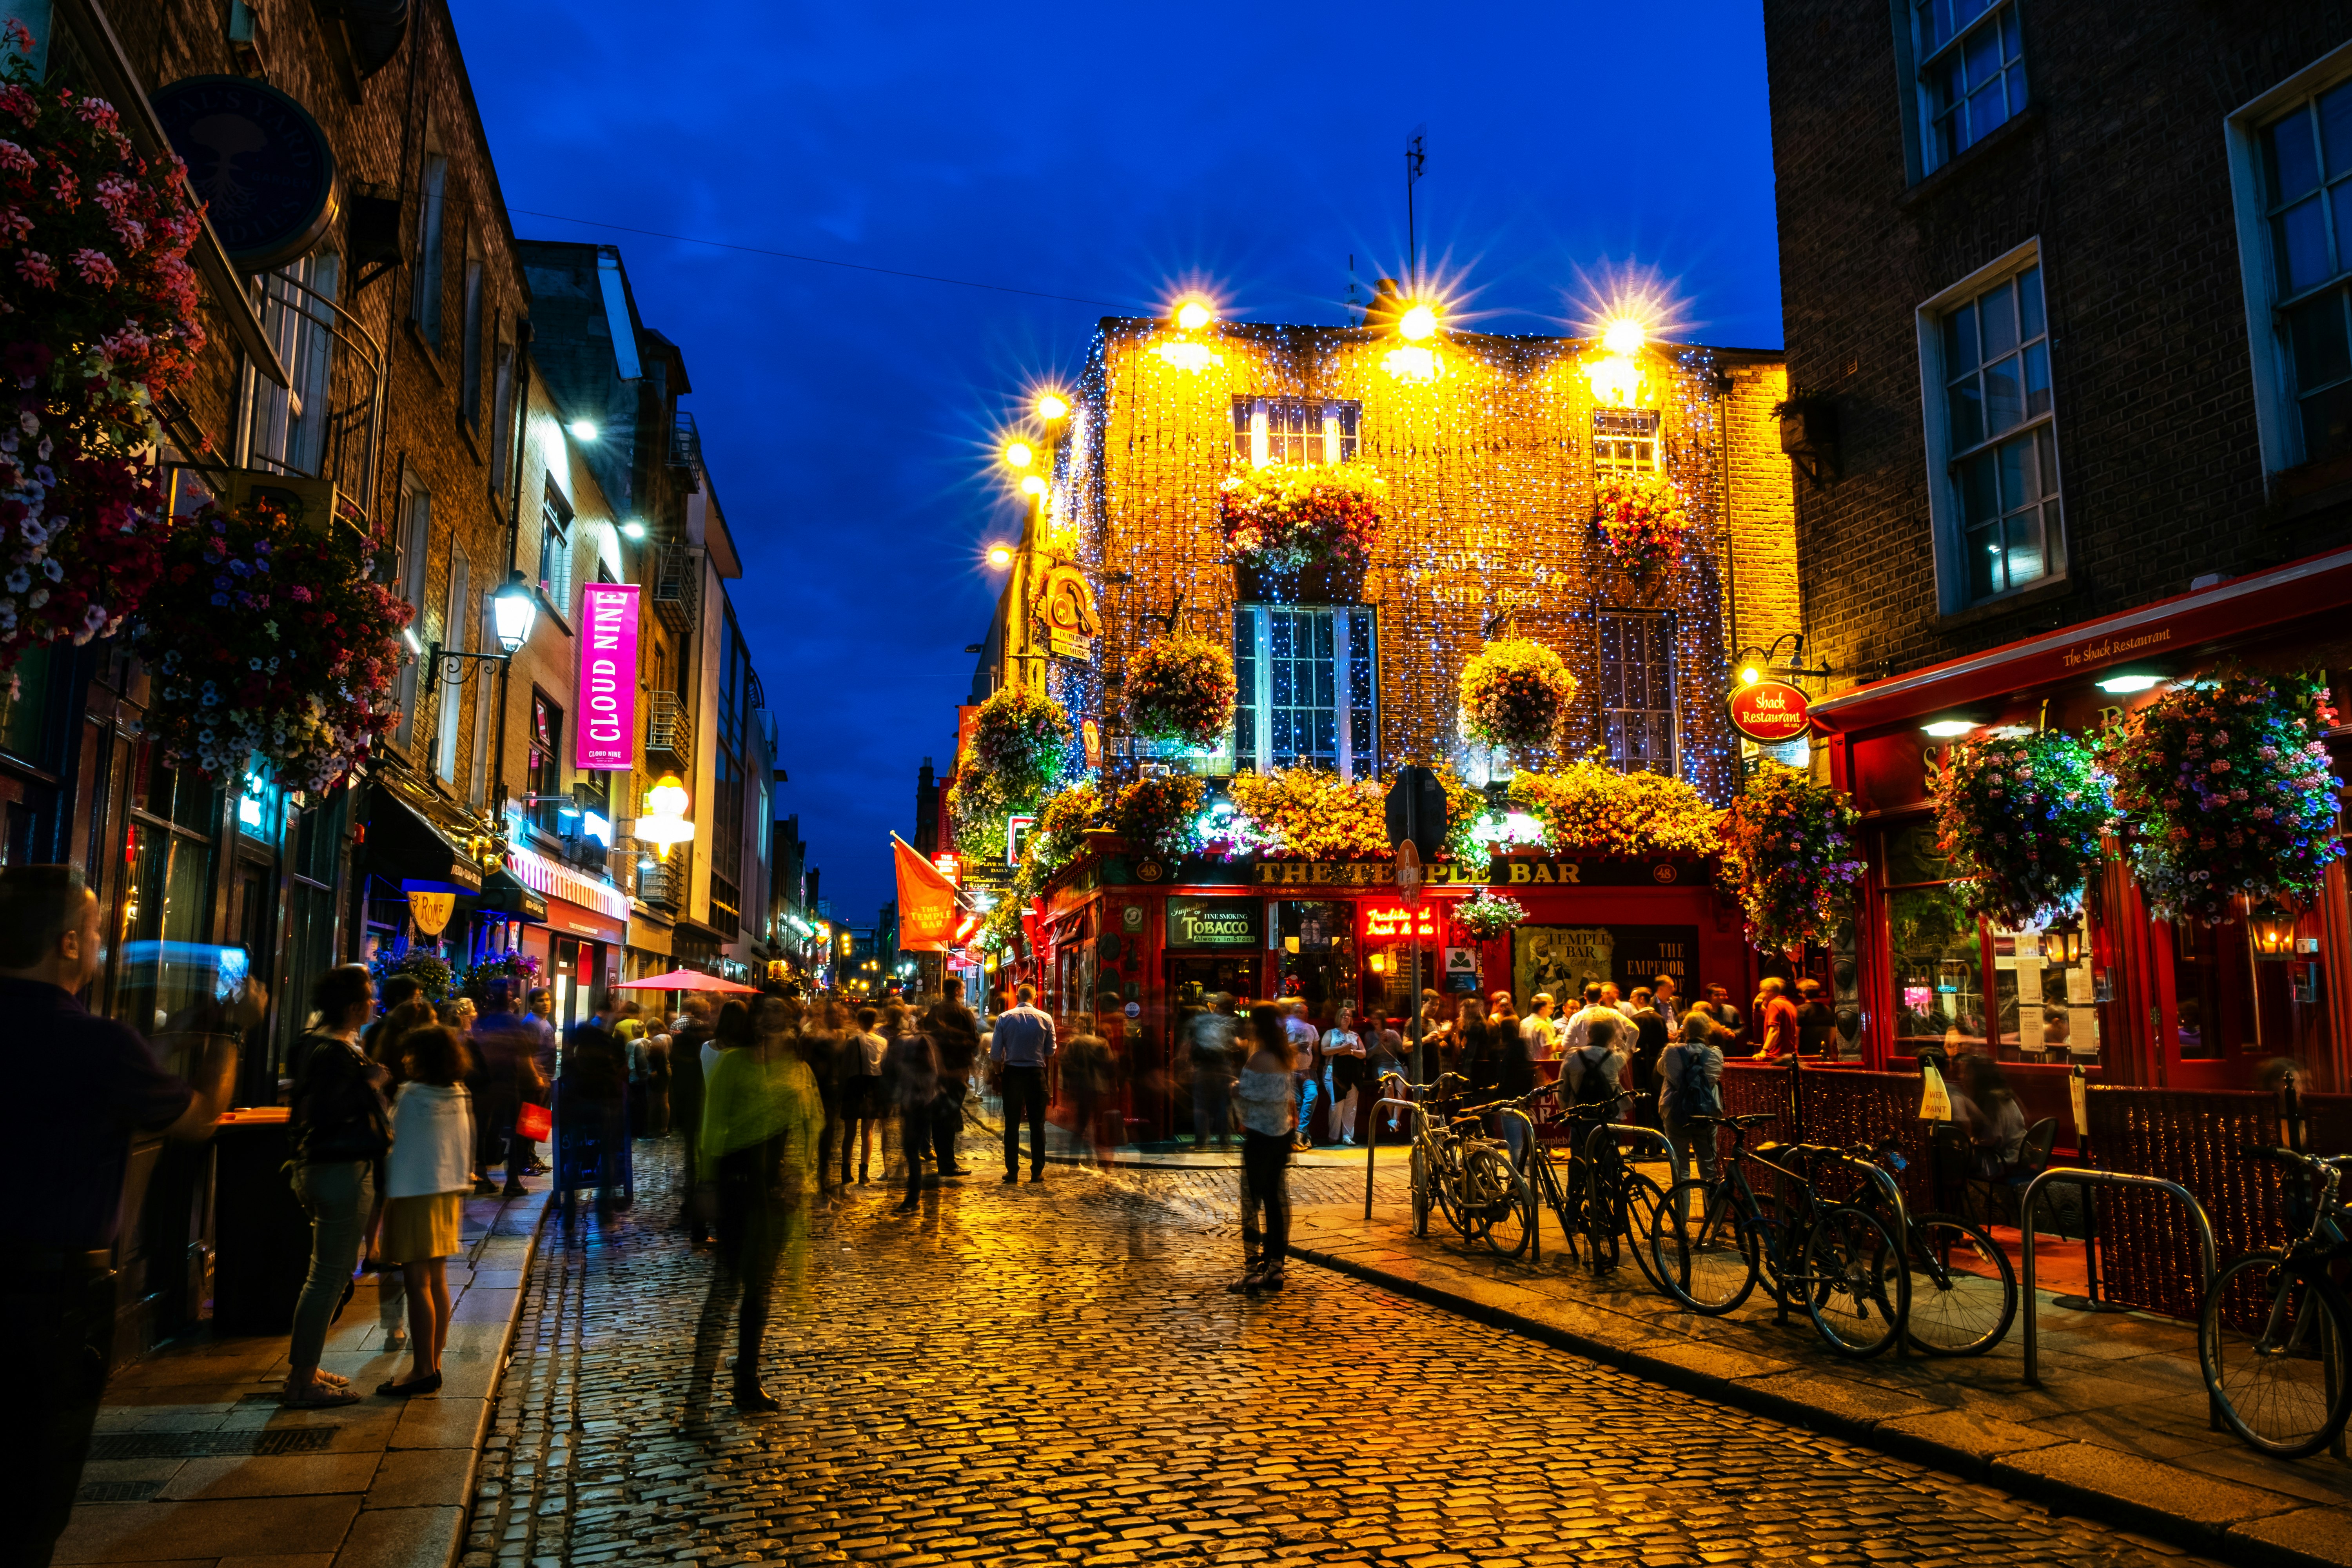 Temple Bar, Dublin, at night time: the famous 'Temple Bar' pub is within shot as people walk by.